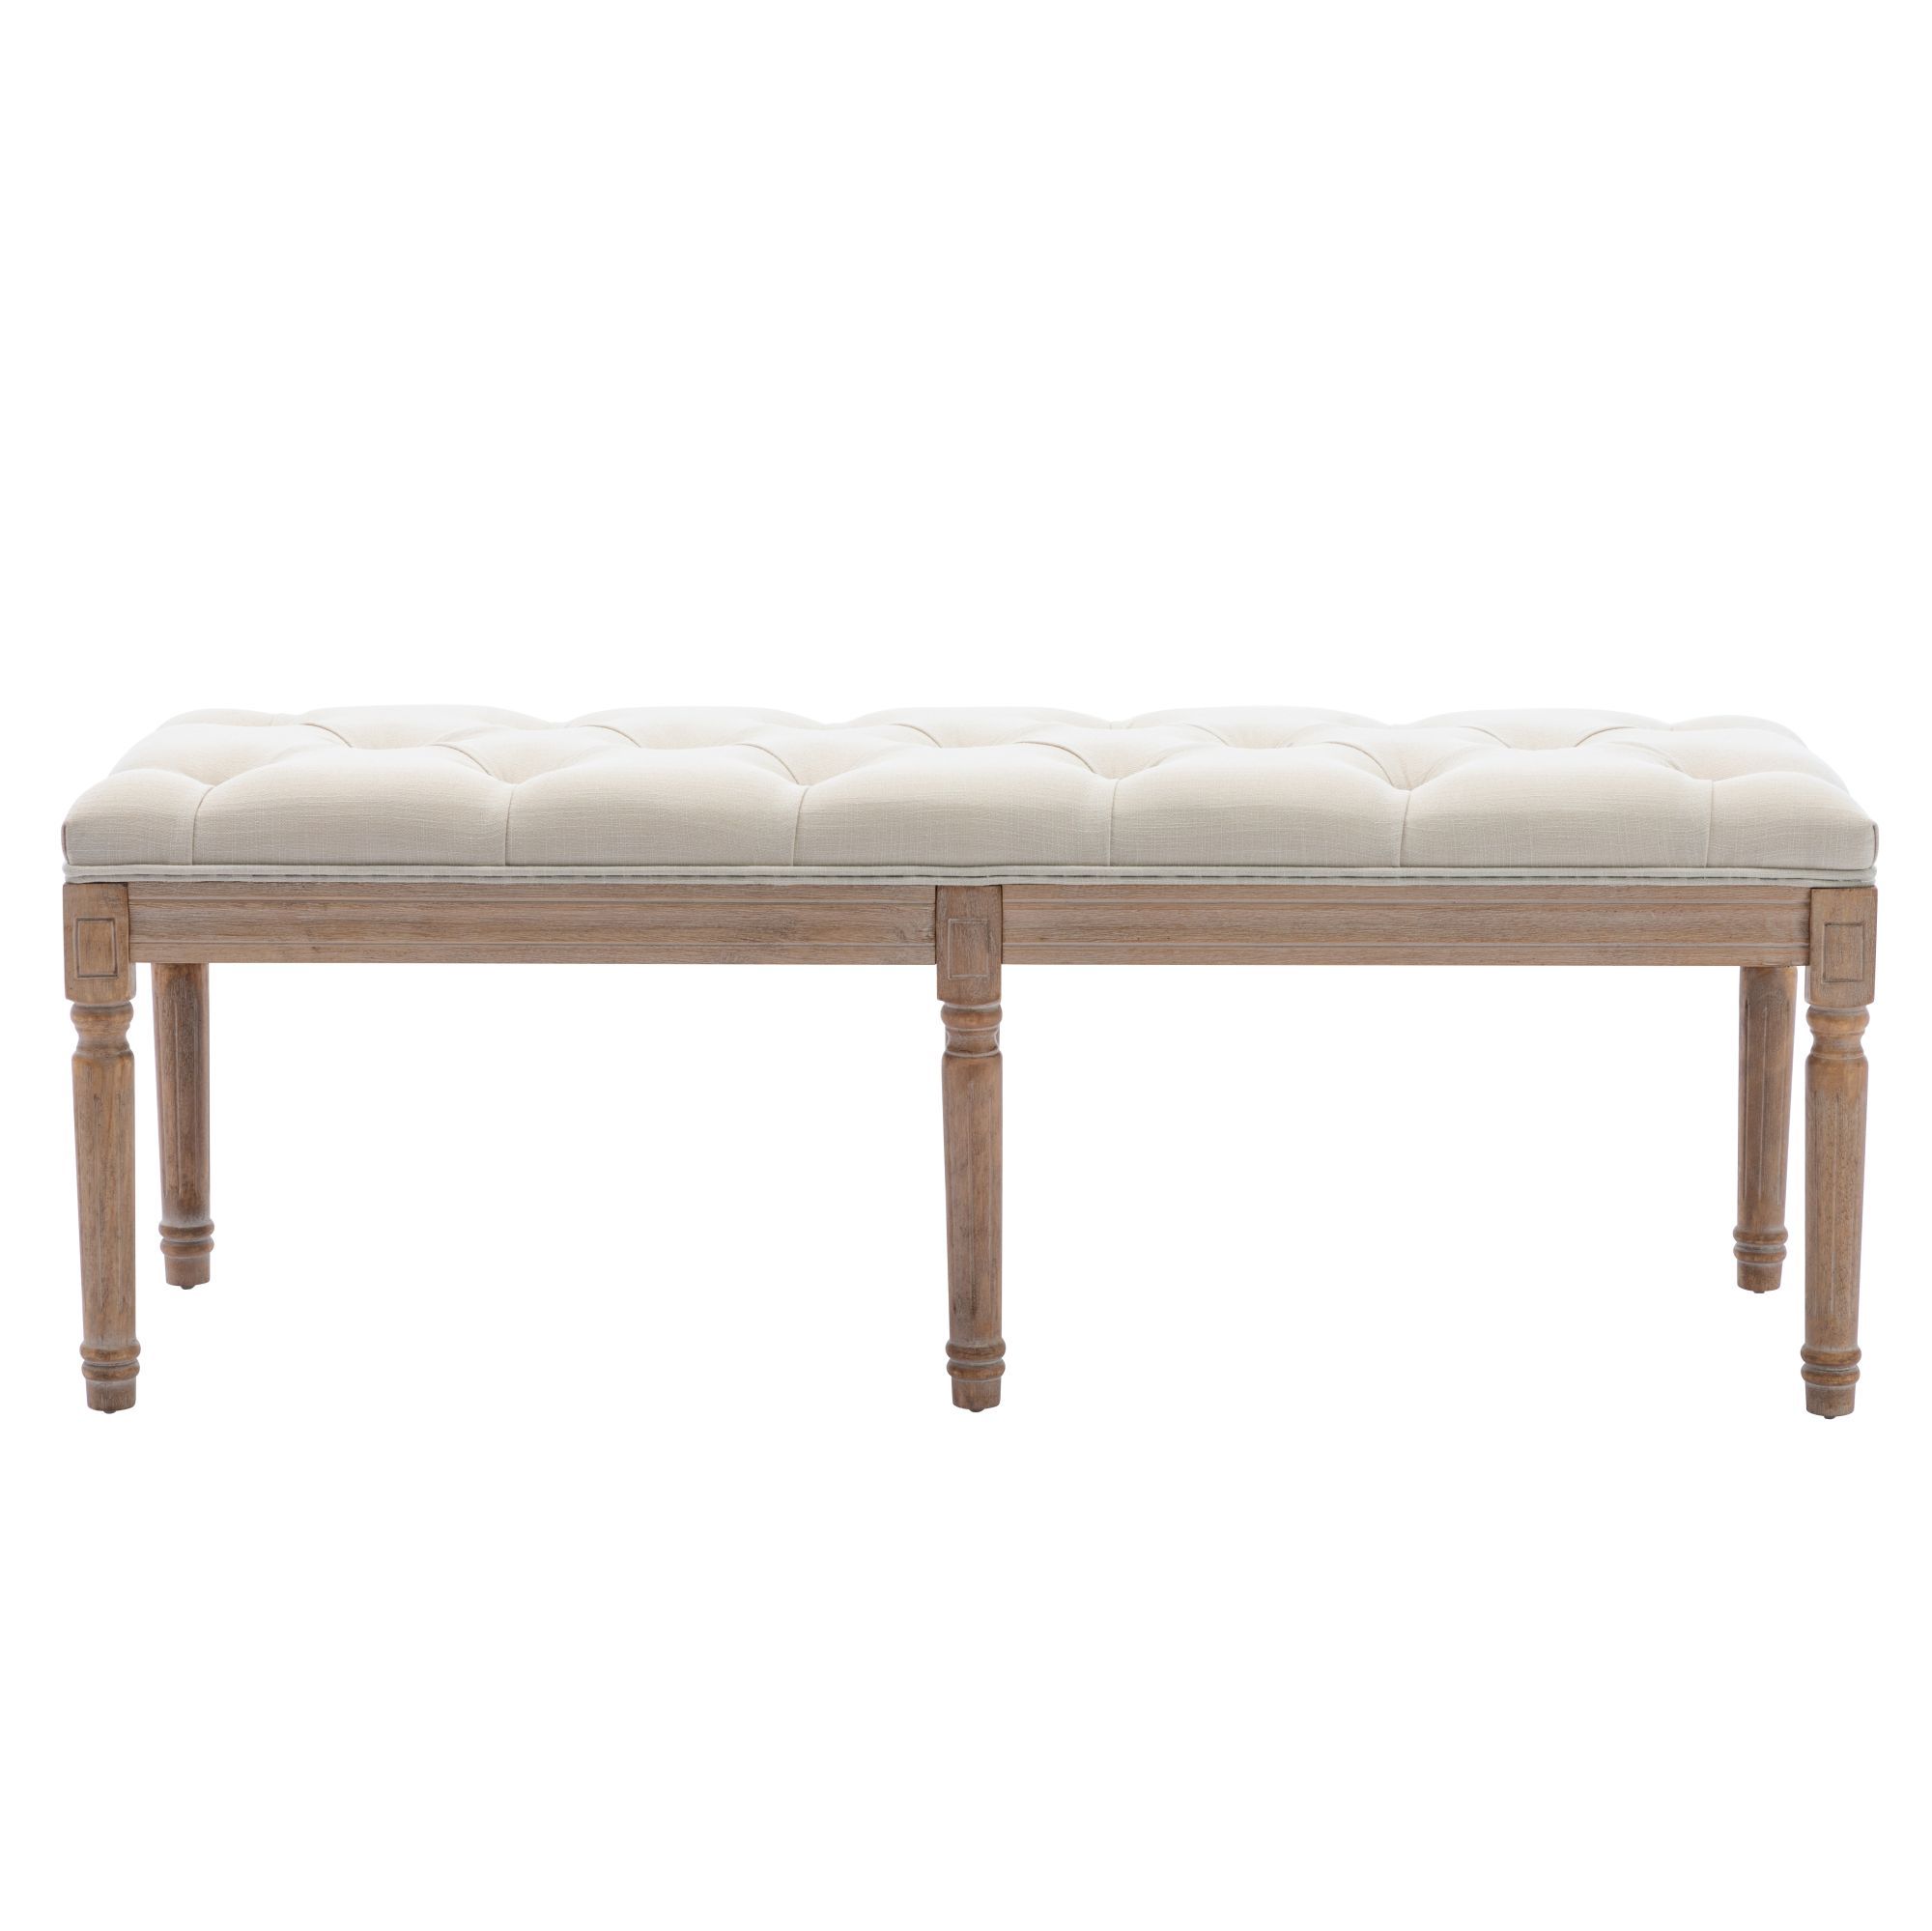 End of Bed Bench Upholstered Entryway Bench French Benchwith Rubberwood Legs for Bedroom/Entry/Hallway-CASAINC